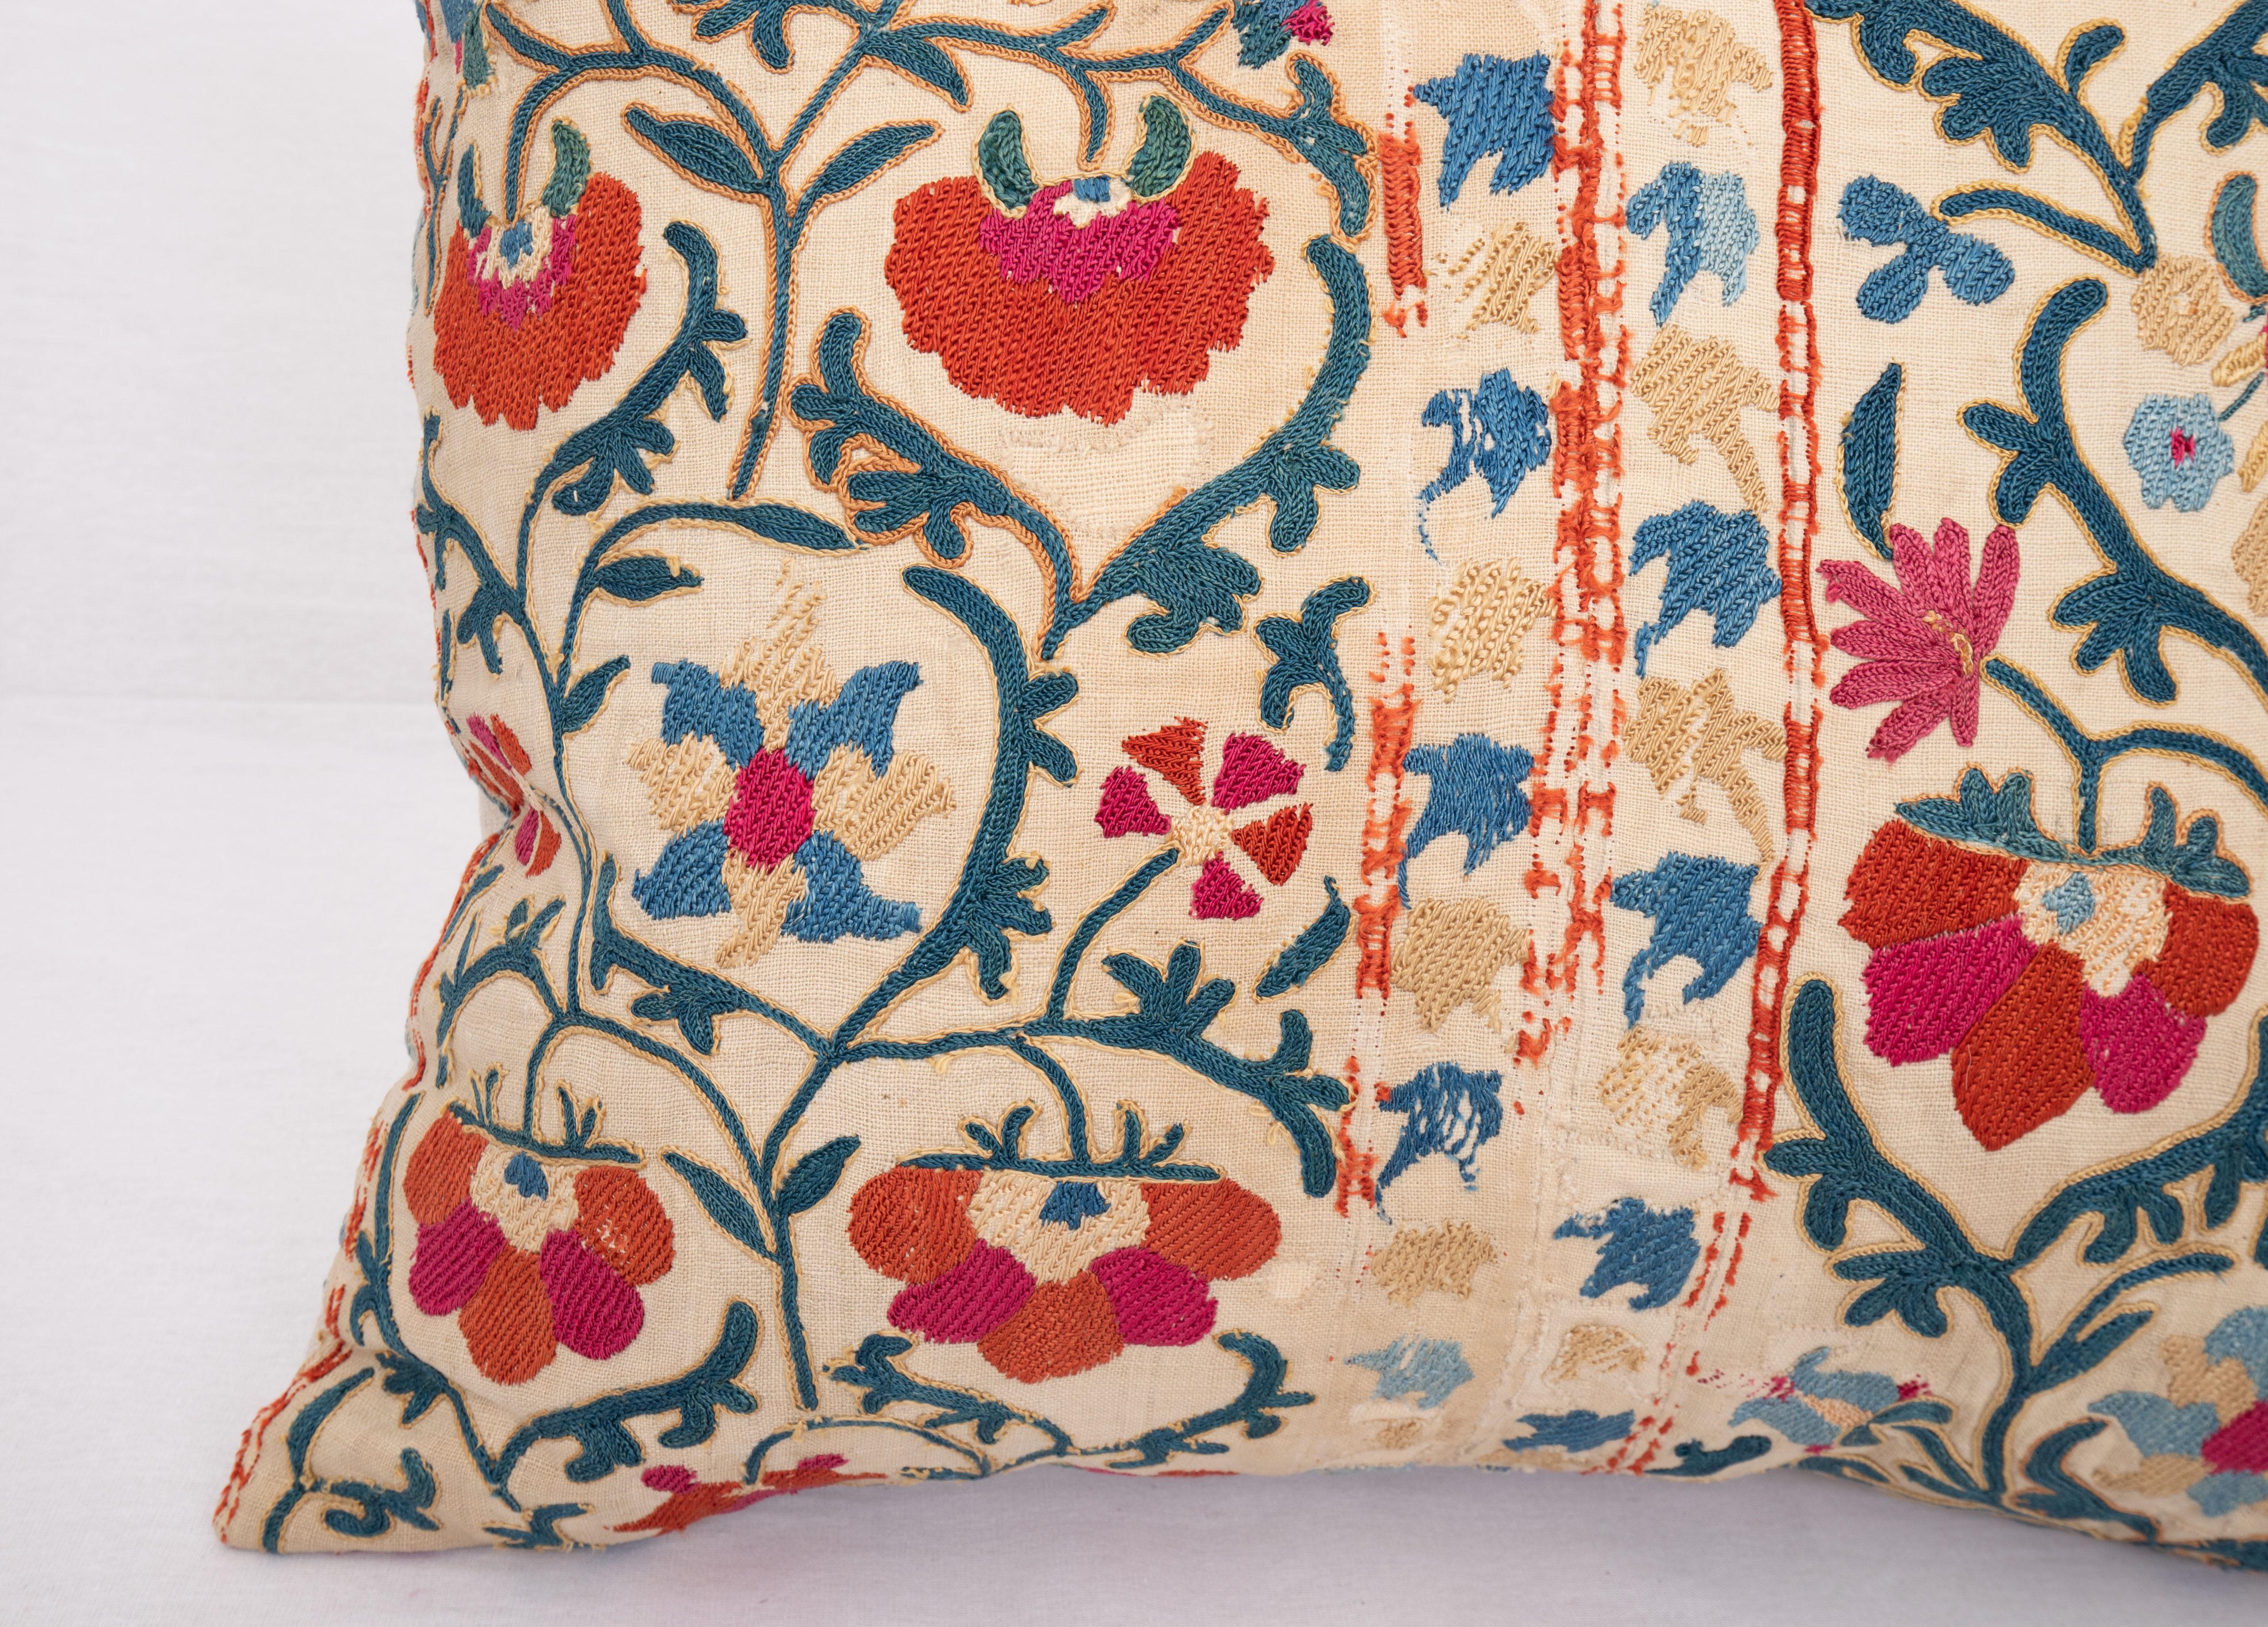 Embroidered Suzani Pillow Case Made from an Antique Suzani Fragment, 19th Century For Sale